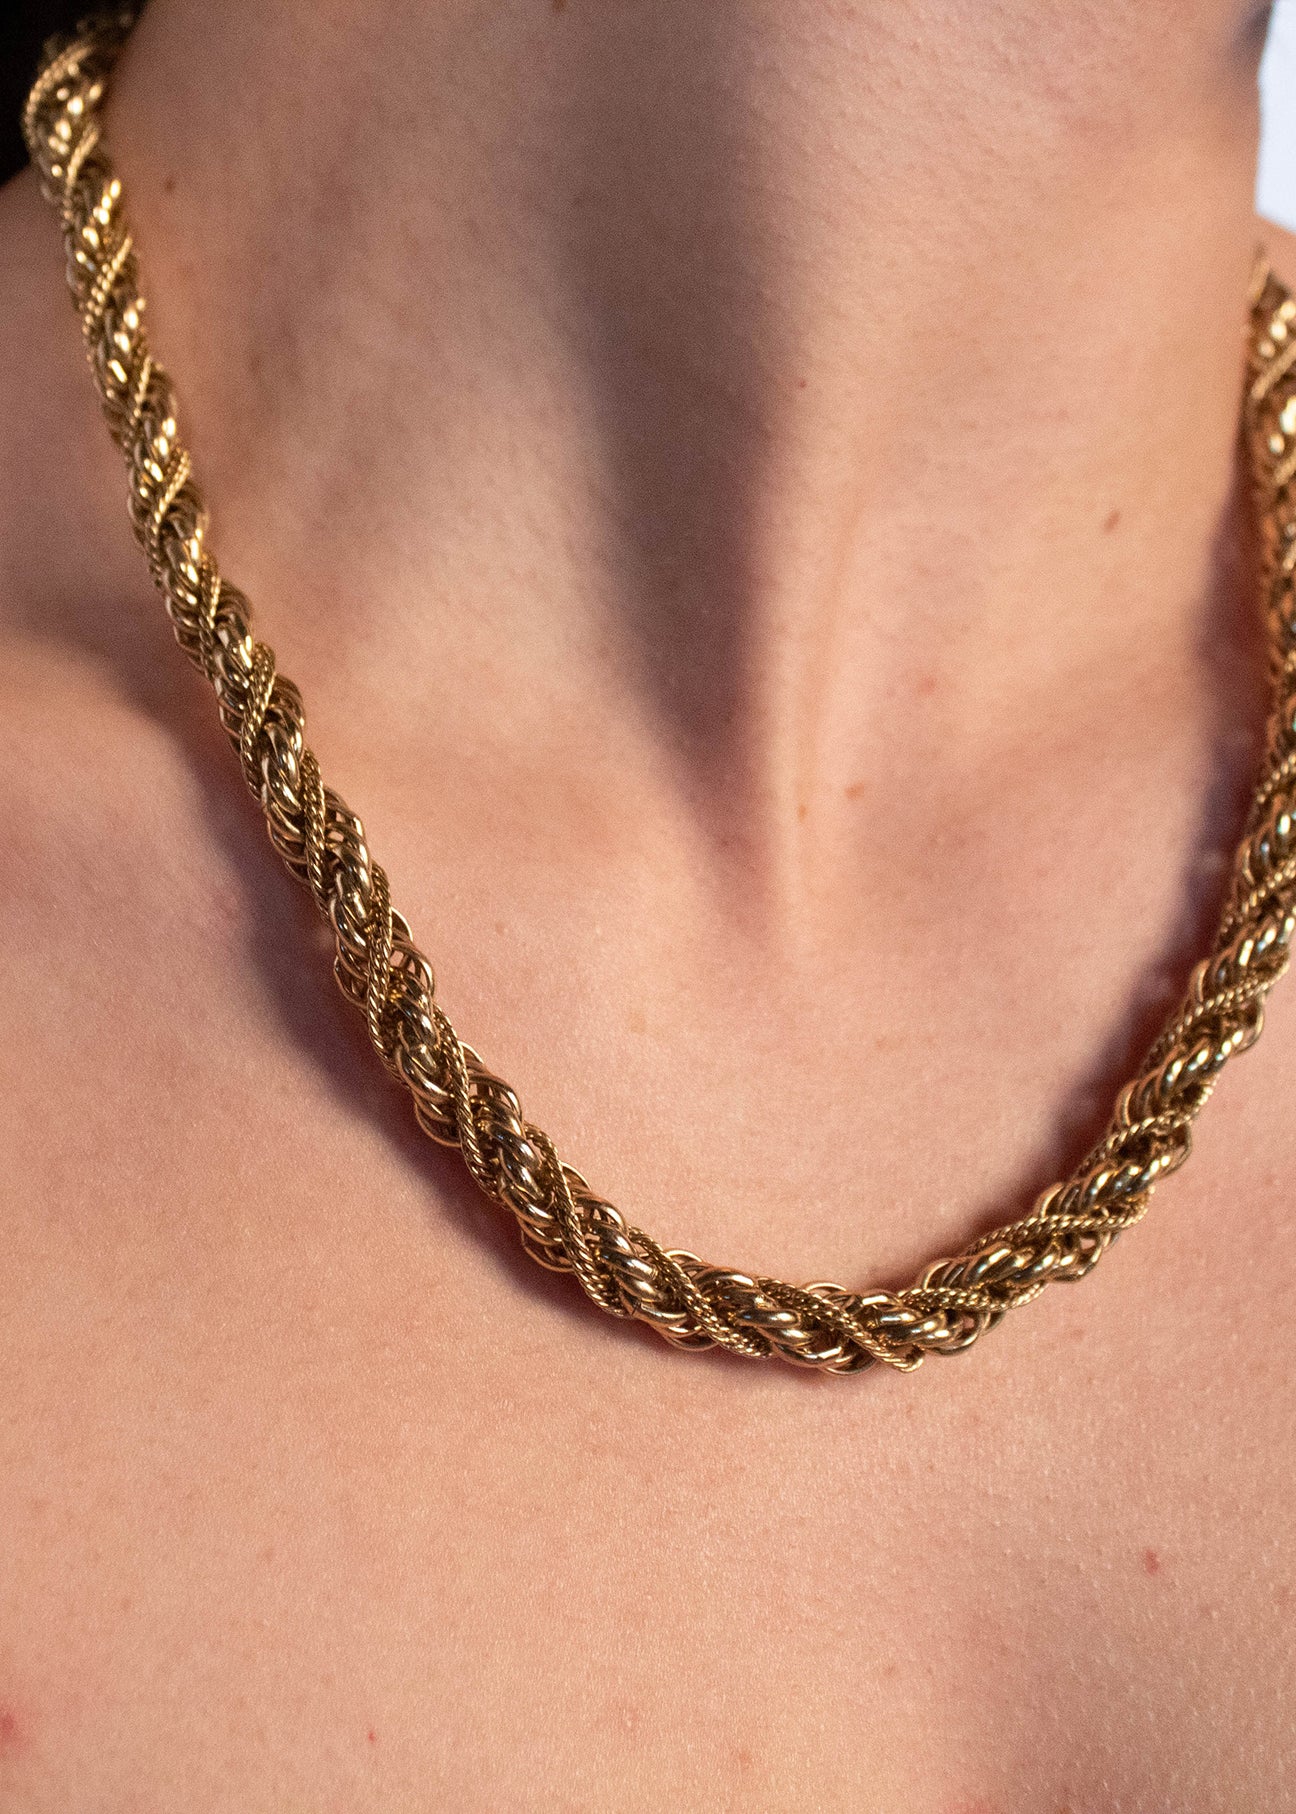 80s Rope Monet Necklace